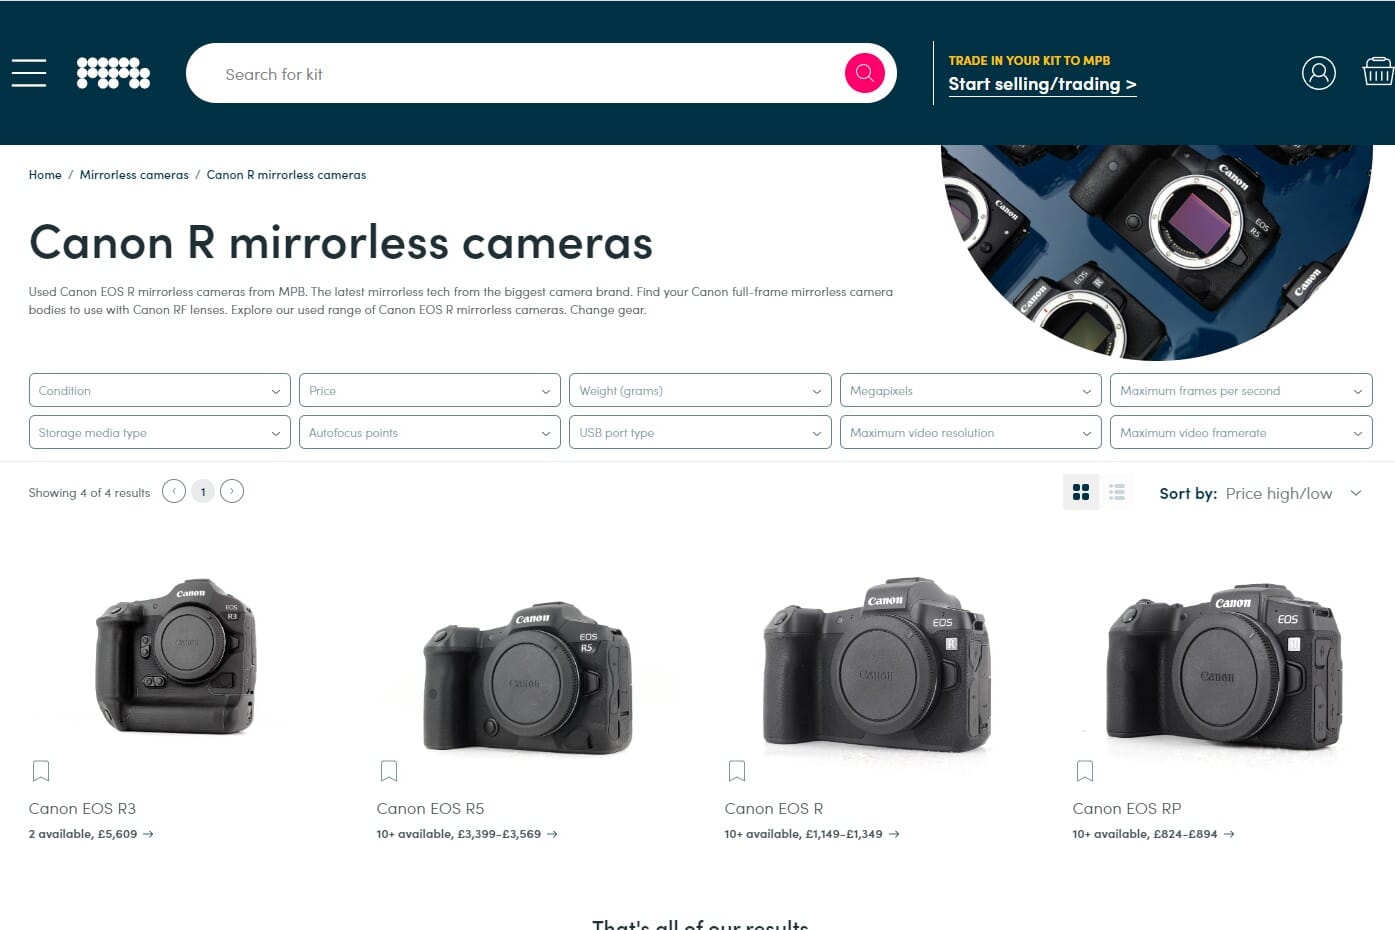 The Roberts Camera website showing new DSLR cameras